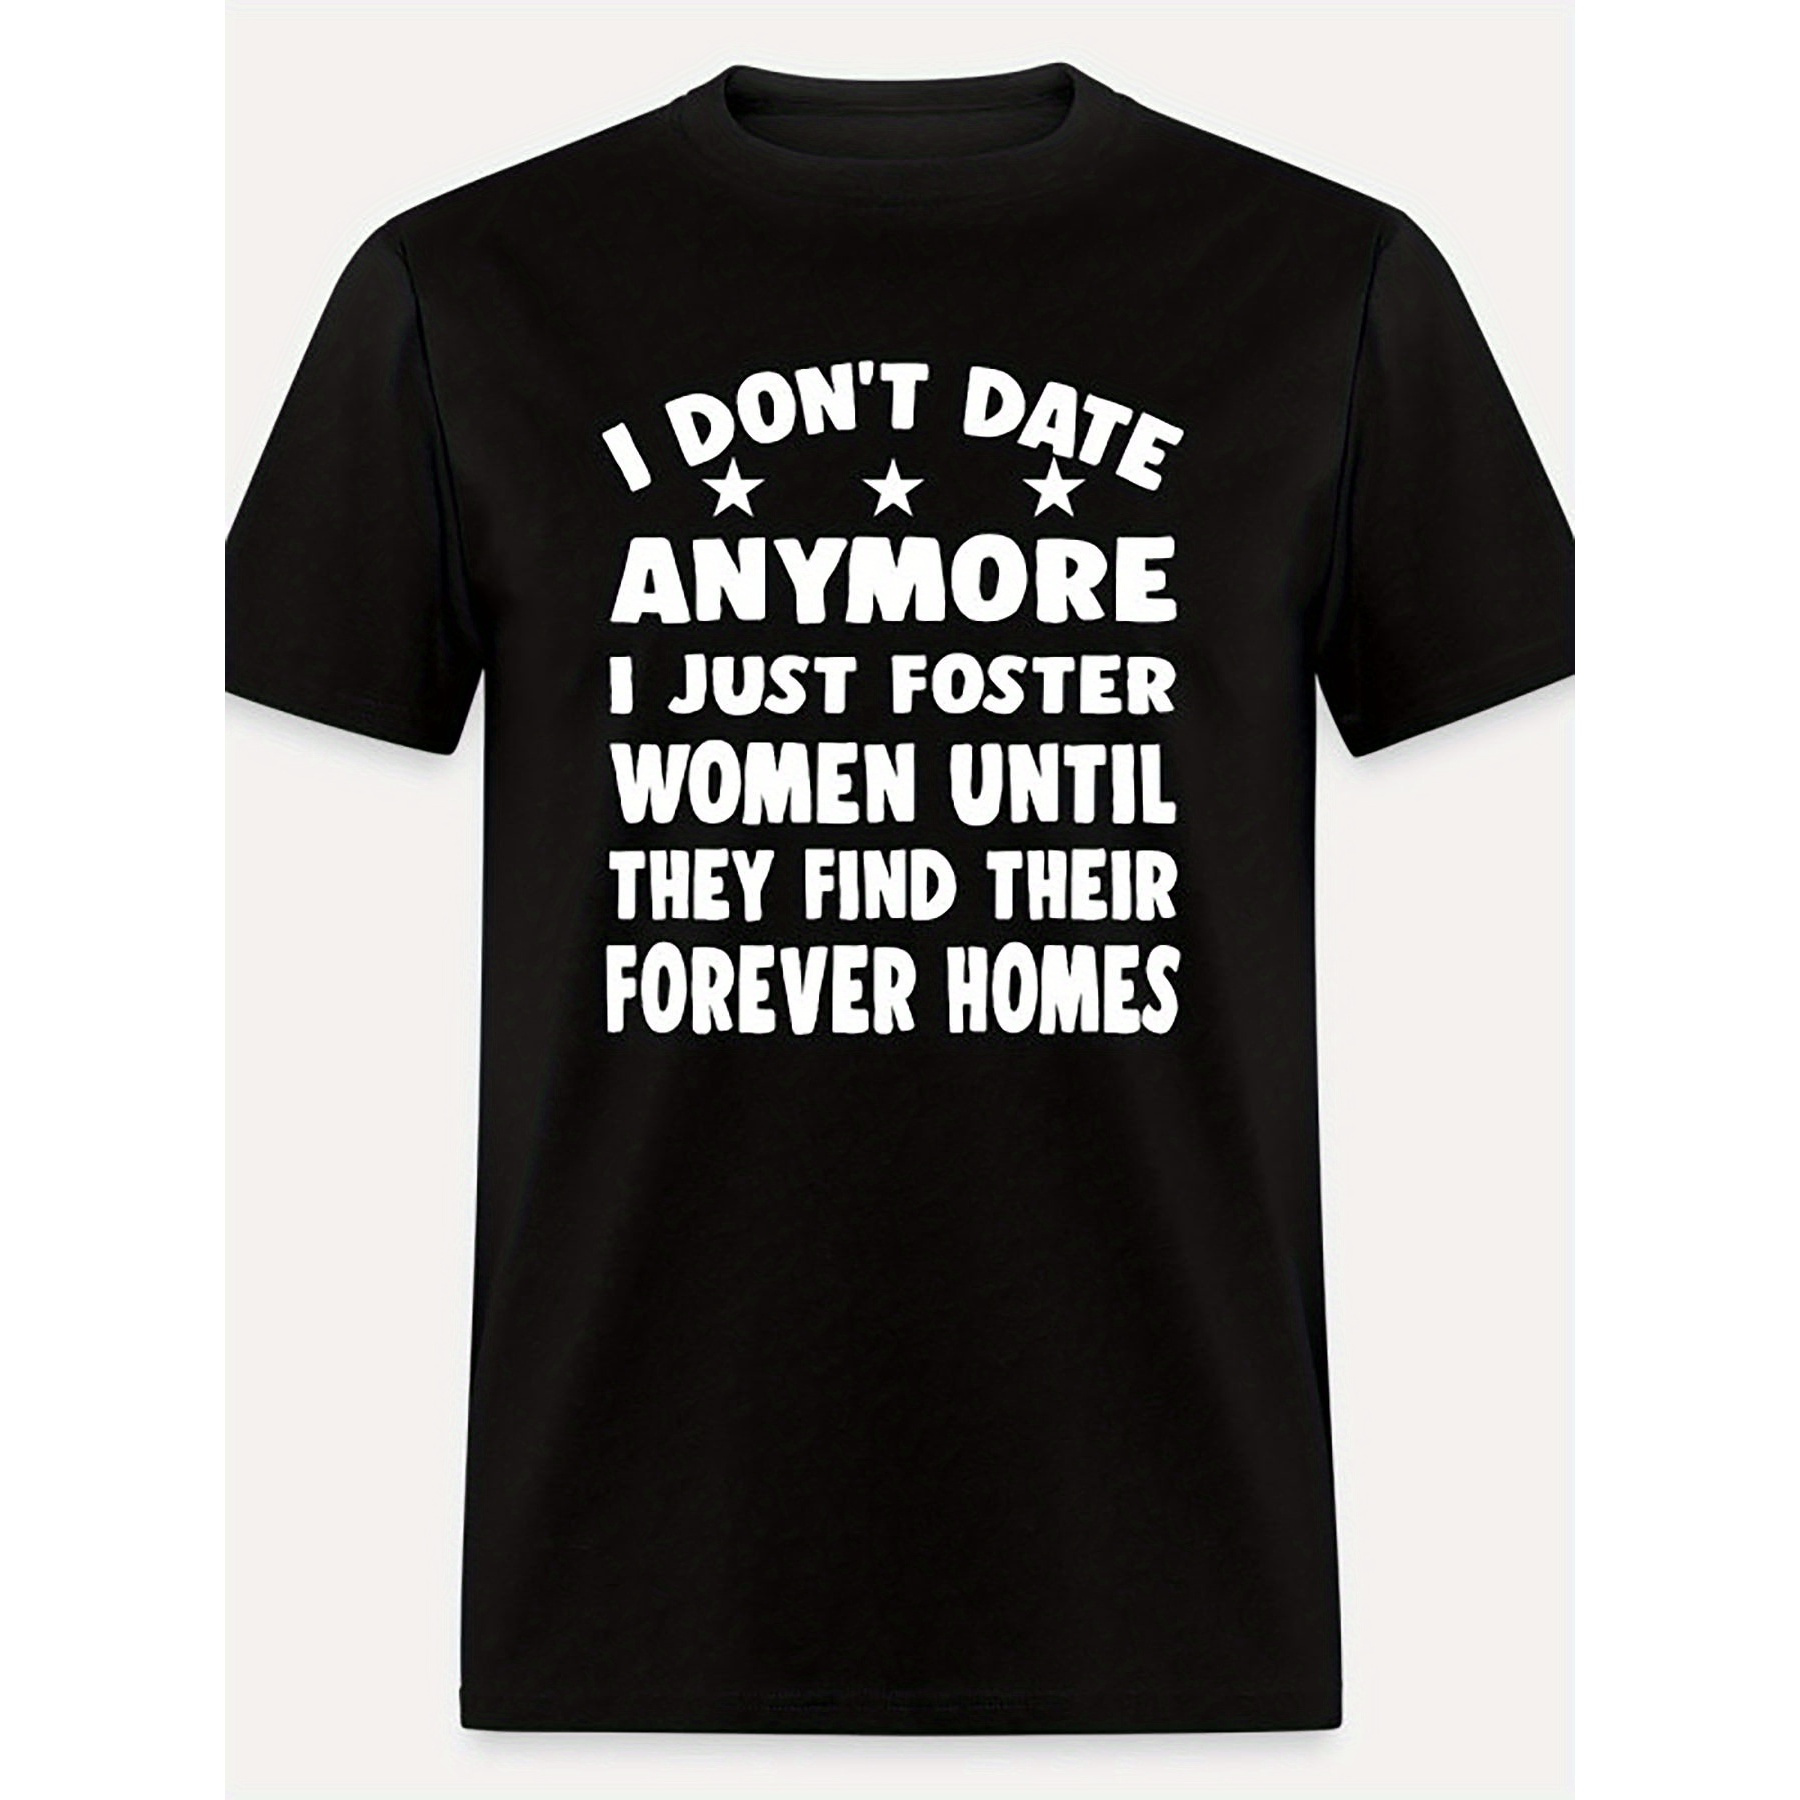 

I Don't Date Anymore I Just Foster Women-1203 Funny Men's Short Sleeve Graphic T-shirt Collection Black